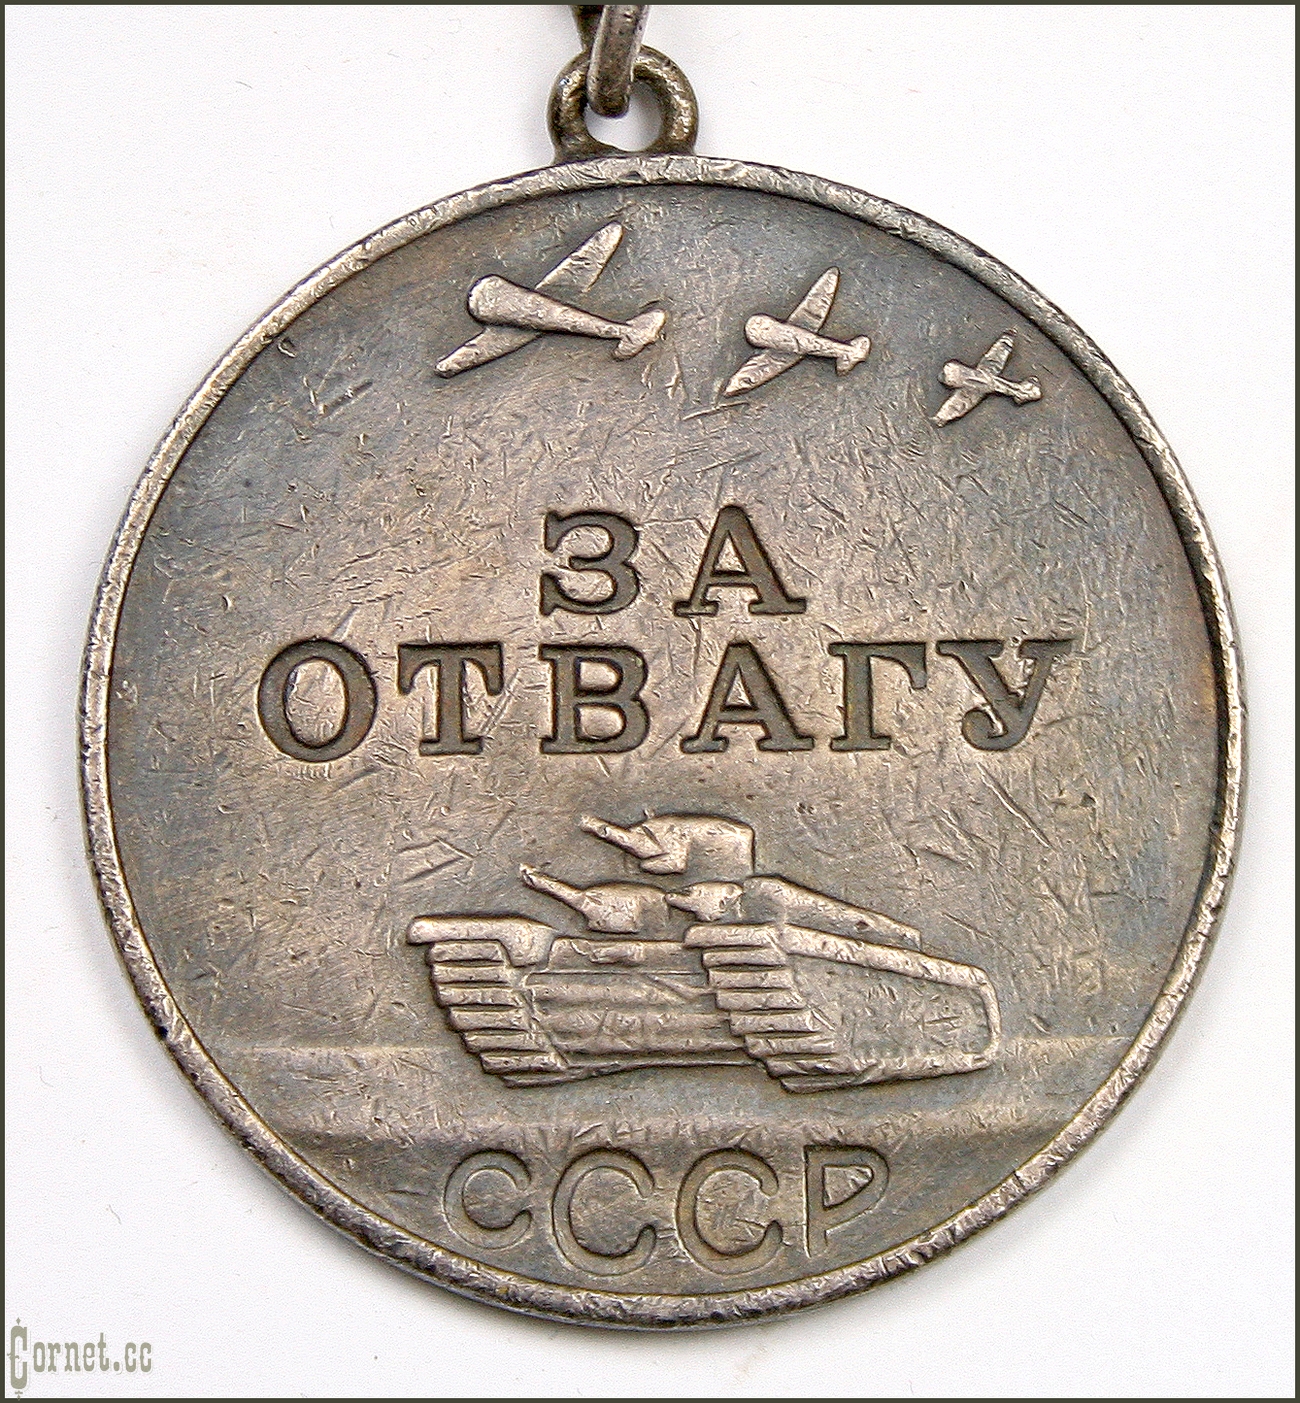 Medal for Courage